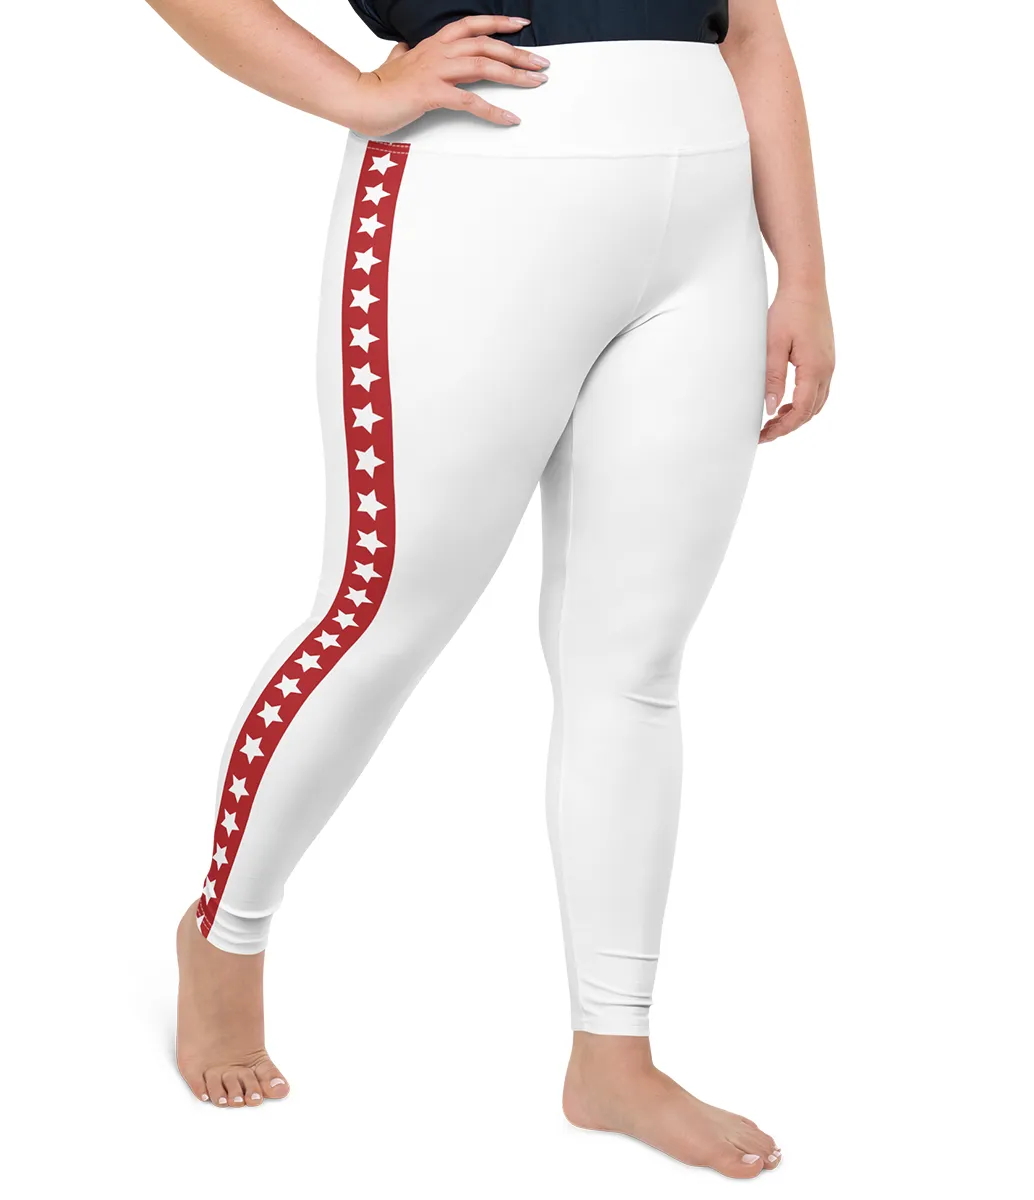 Red & White Striped Plus Size Tights